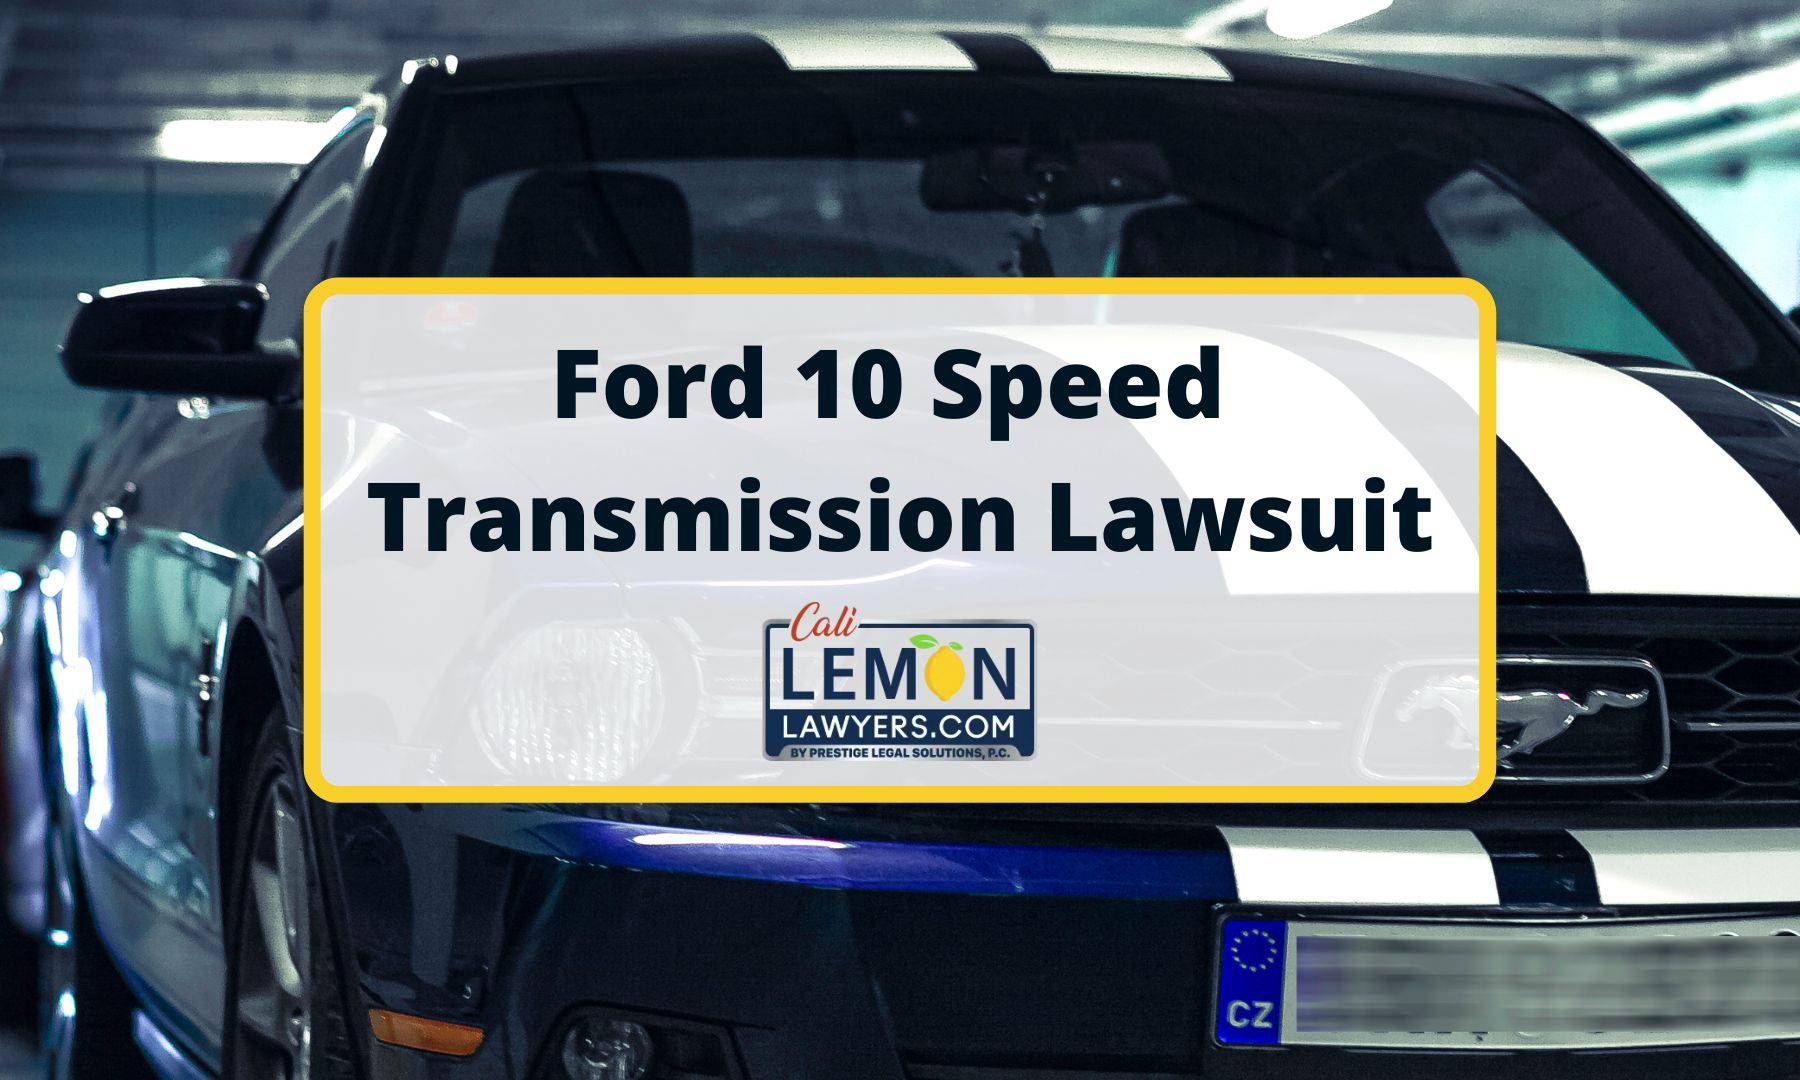 Ford 10 Speed Transmission Lawsuit